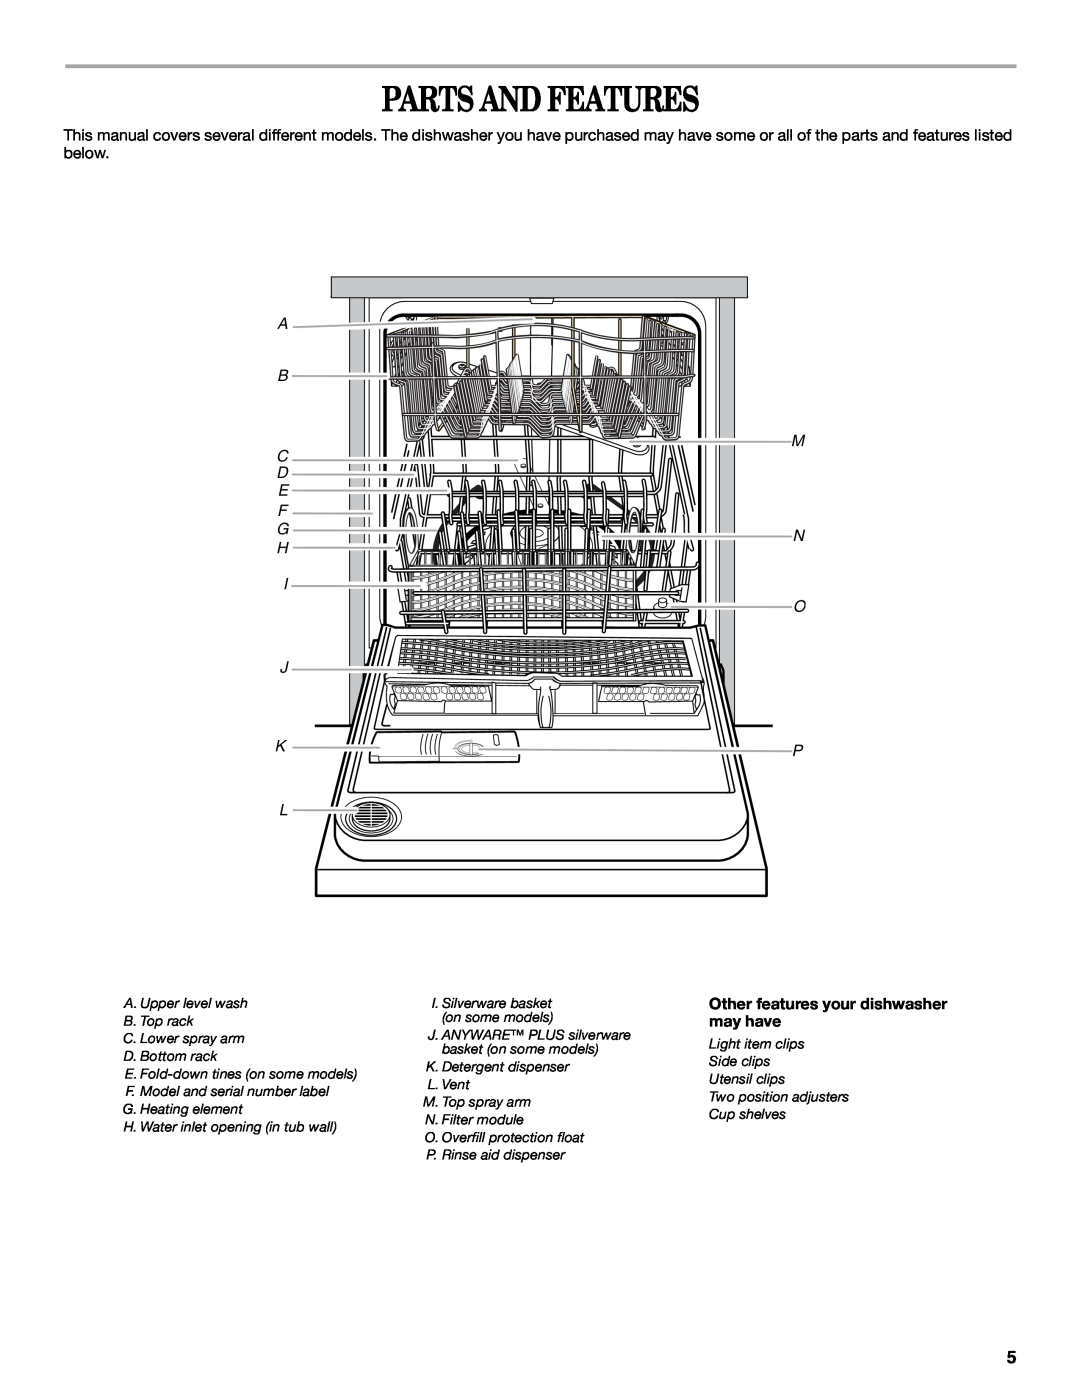 Whirlpool DU1100, DU1200, DU1148, DU1145, DU1015, DU1055, DU1101, DU1248, DU1201, DU1245, DUL240 manual Parts And Features, may have 